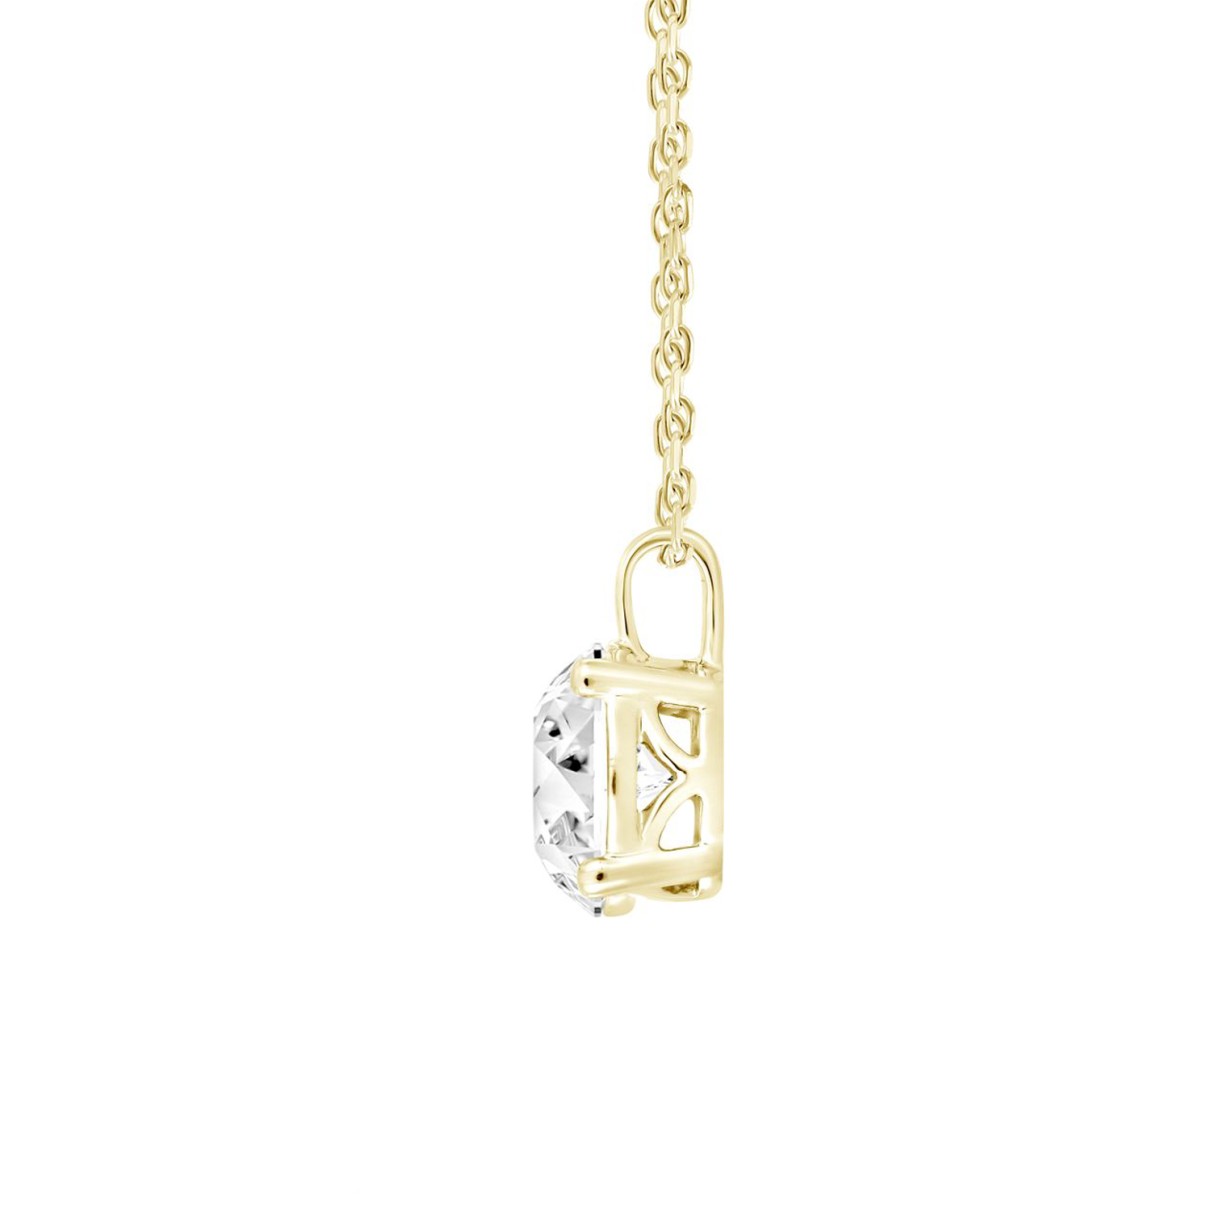 LADIES SOLITAIRE PENDANT WITH CHAIN 3CT ROUND DIAMOND 14K YELLOW GOLD 